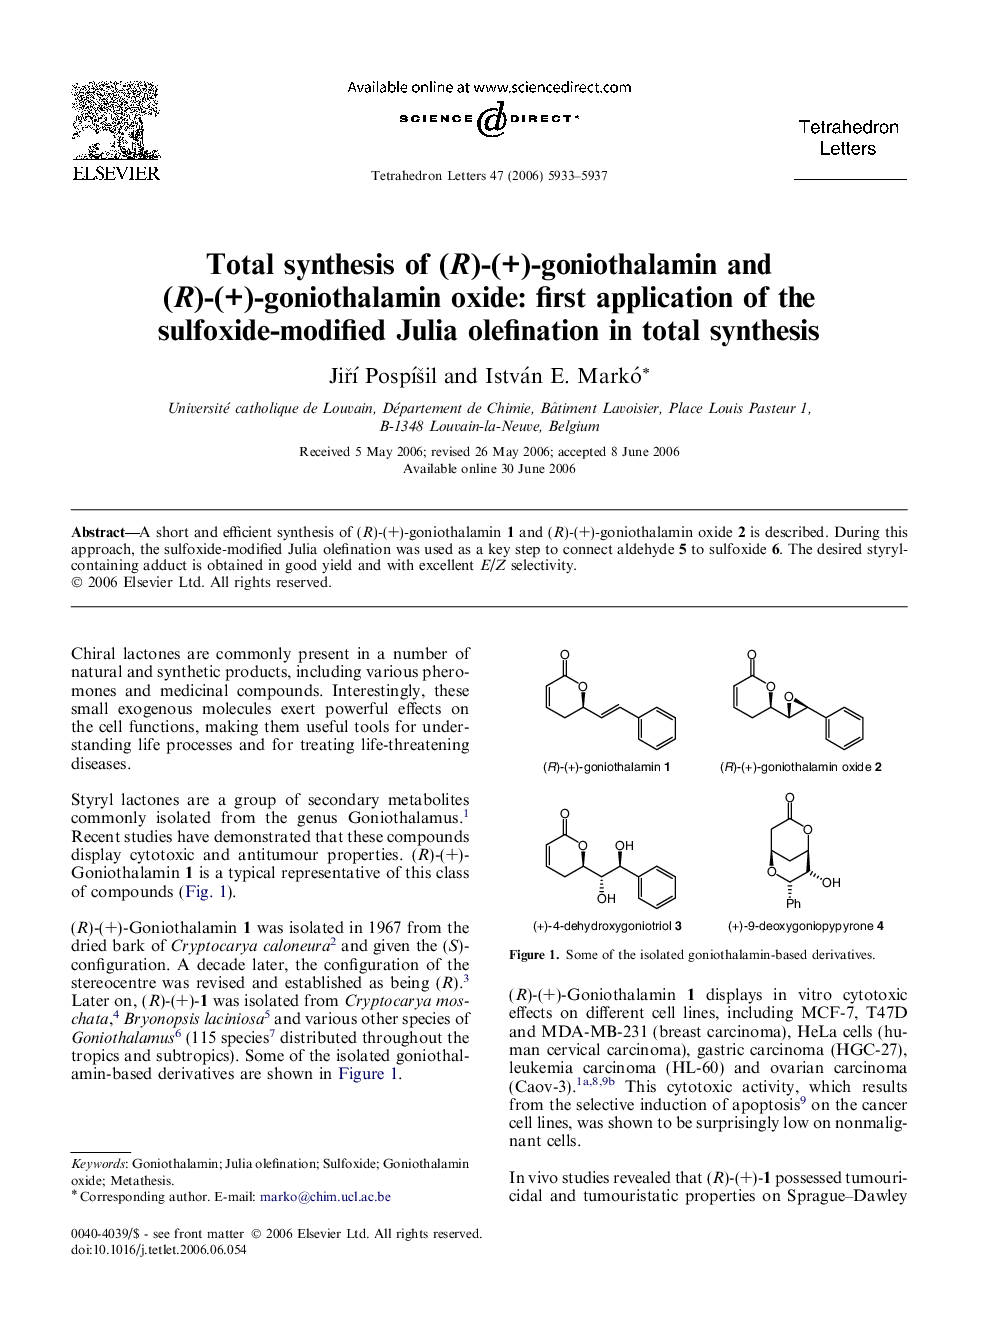 Total synthesis of (R)-(+)-goniothalamin and (R)-(+)-goniothalamin oxide: first application of the sulfoxide-modified Julia olefination in total synthesis